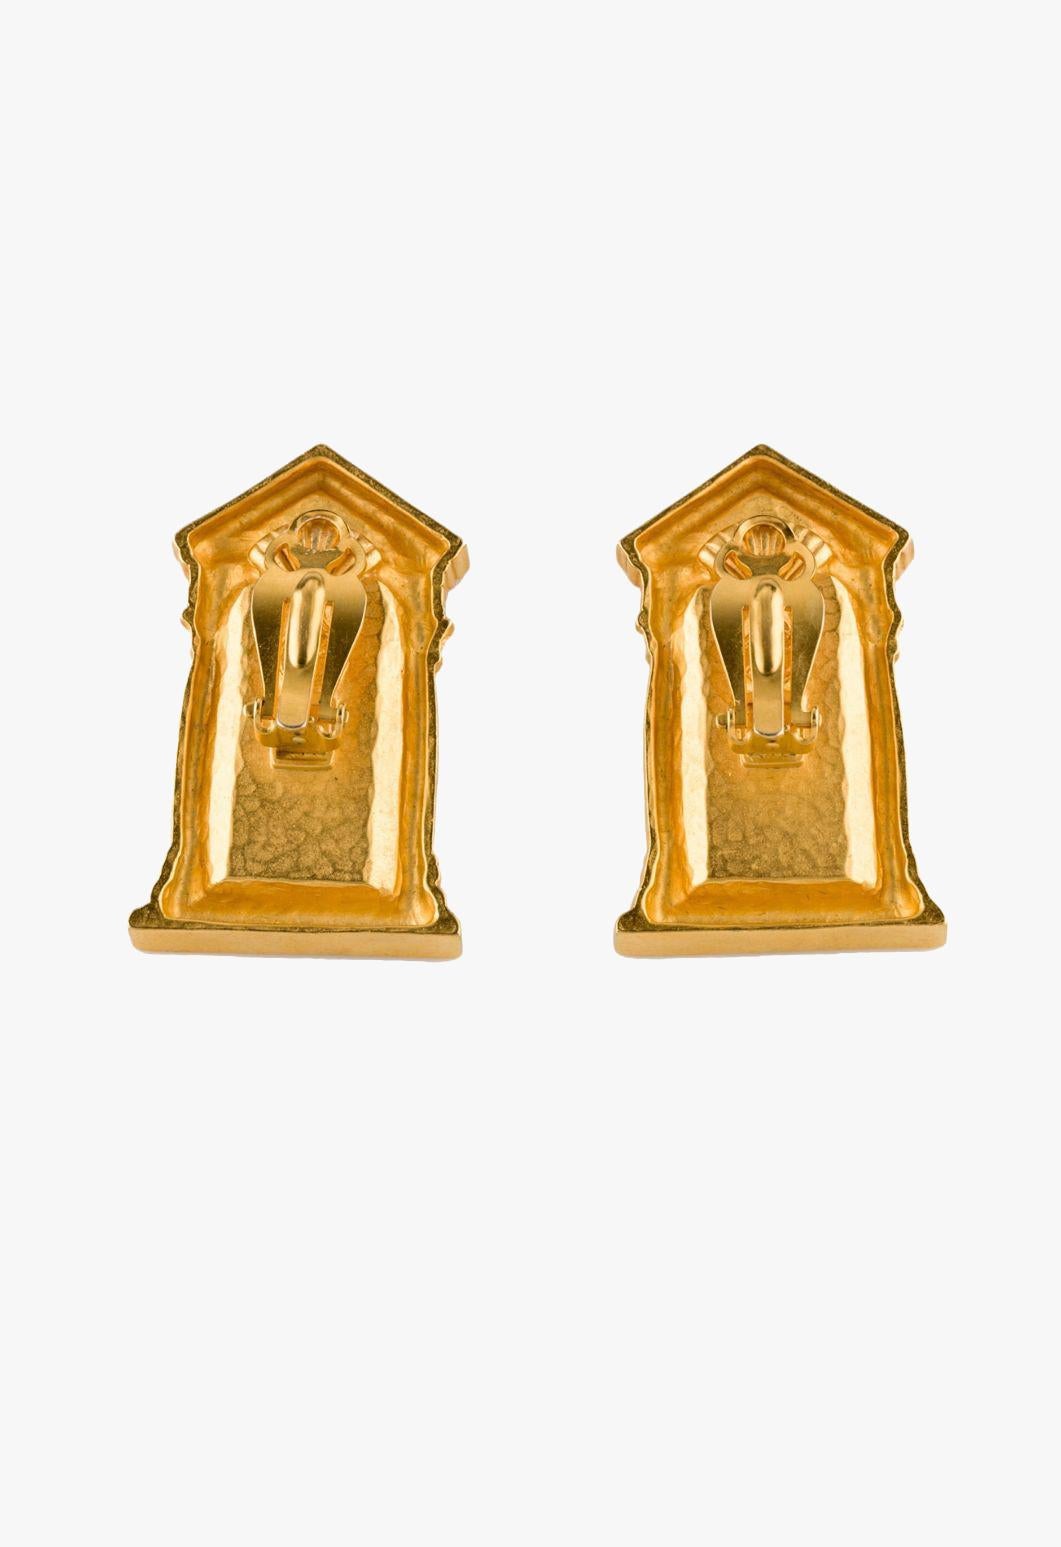 Karl Lagerfeld vintage greek temple door clip-on earrings, 1980s In Good Condition For Sale In New York, NY